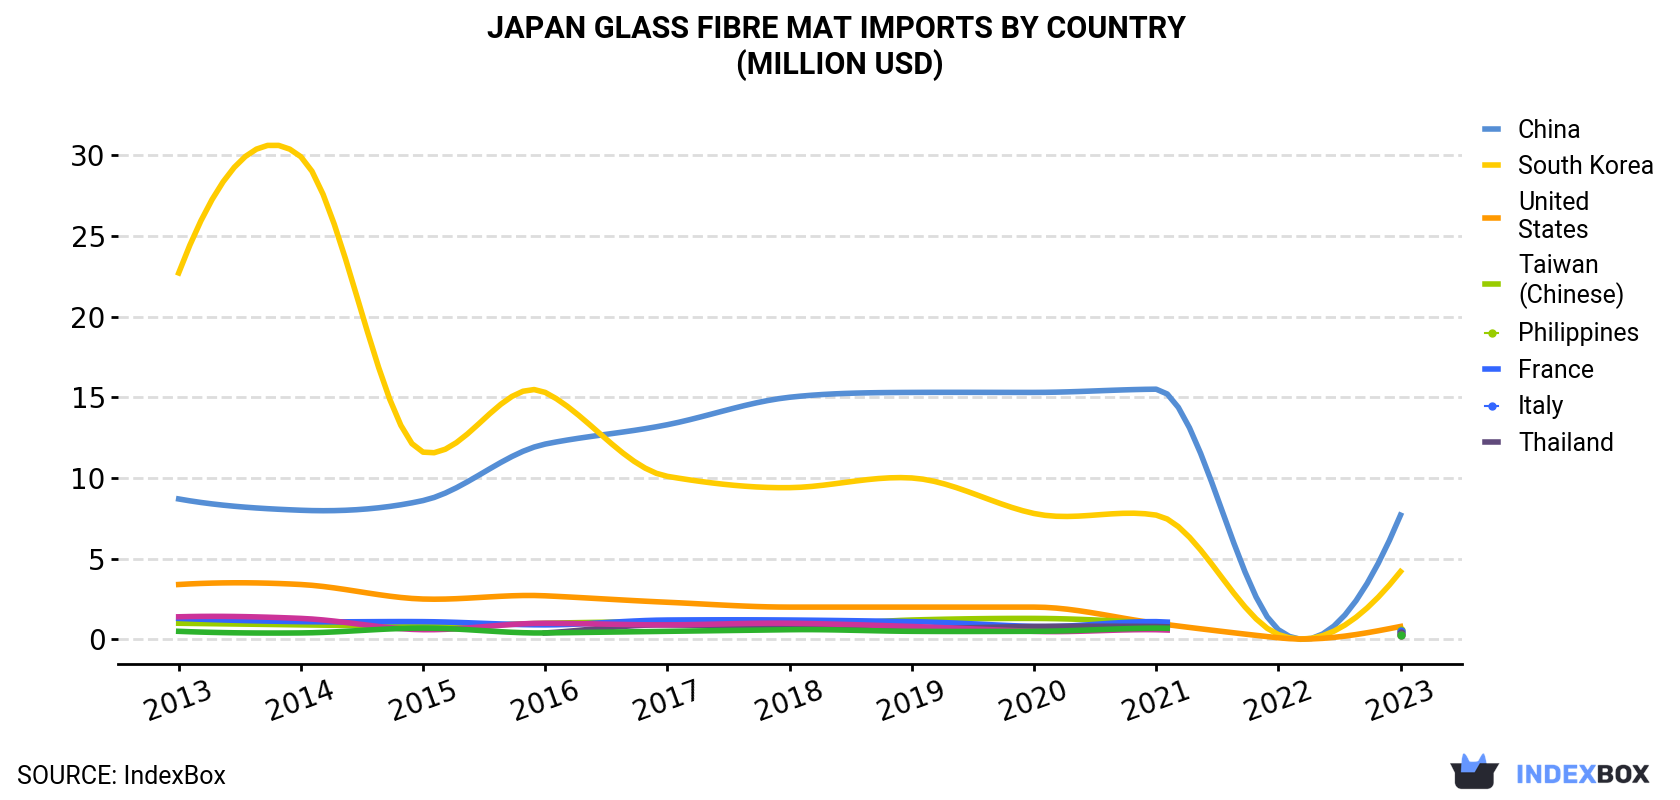 Japan Glass Fibre Mat Imports By Country (Million USD)